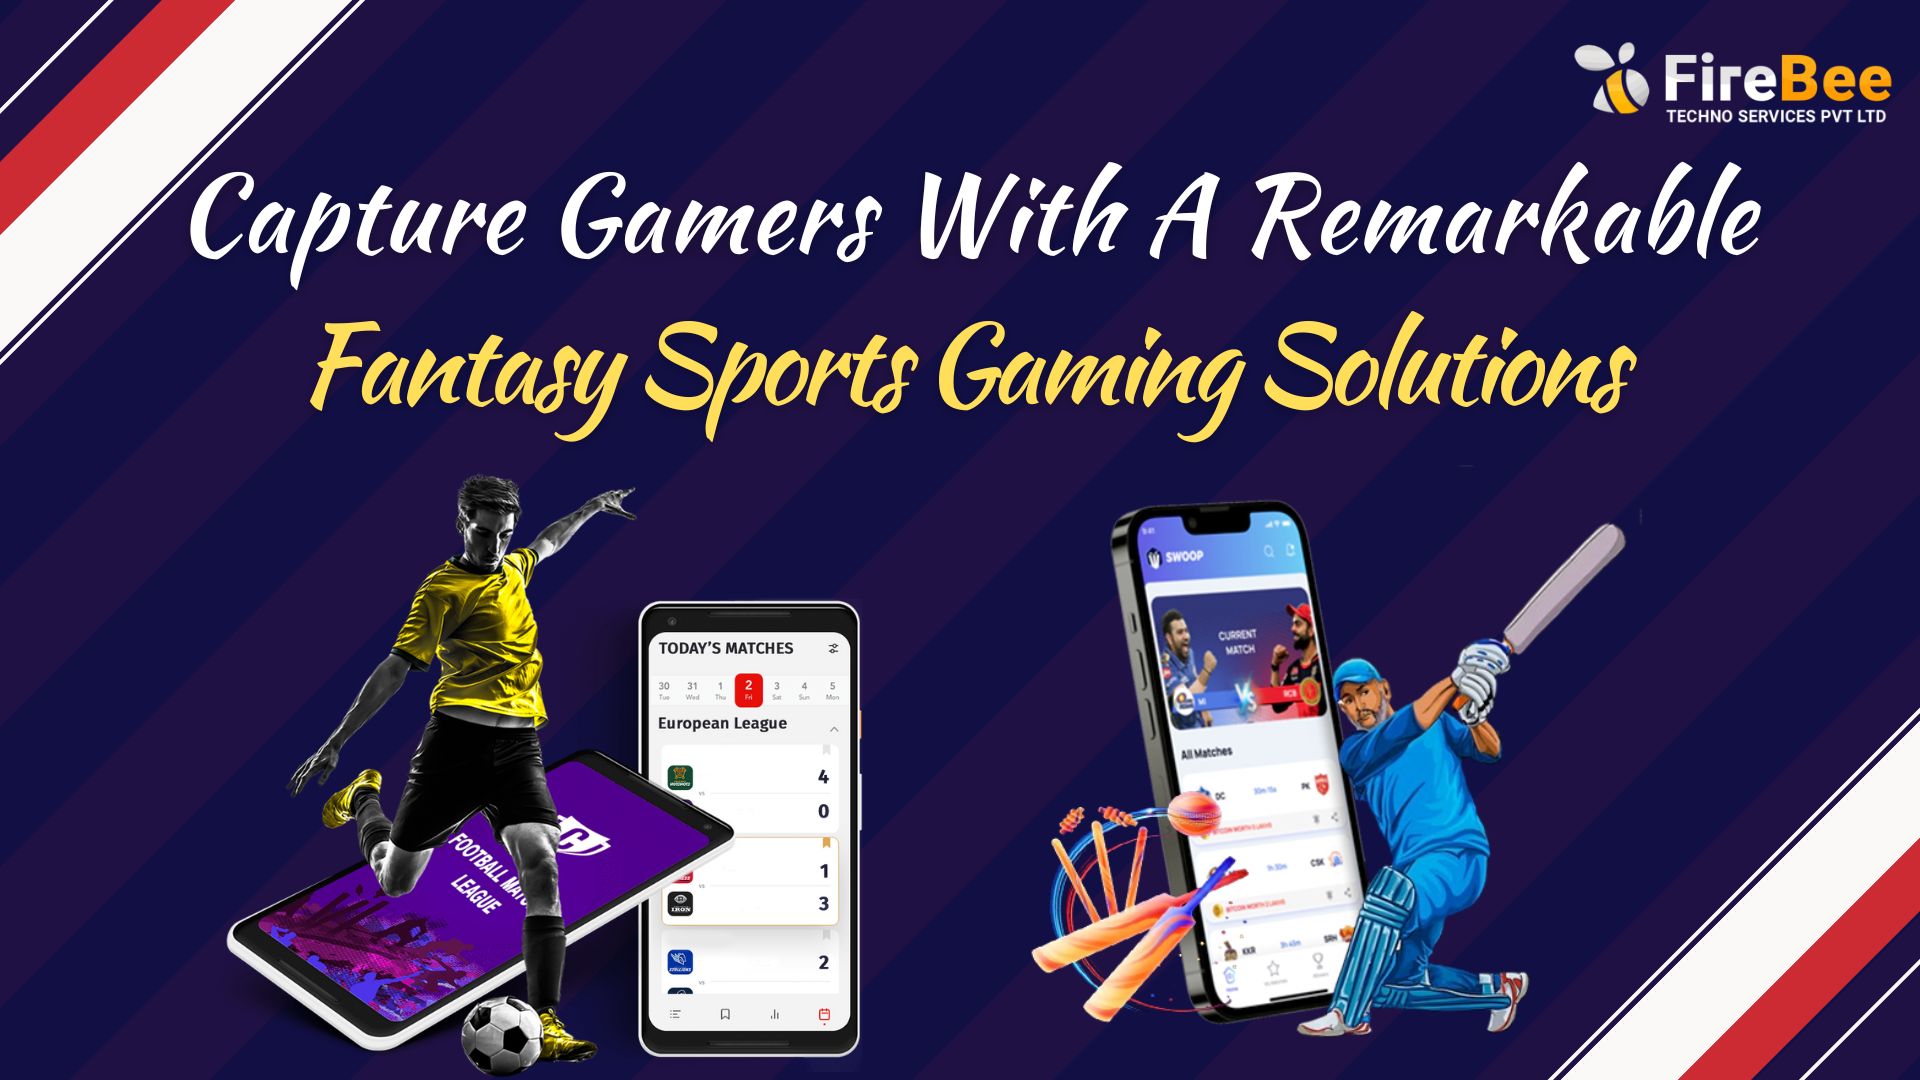 Capture Gamers With A Remarkable Fantasy Sports Gaming Solutions